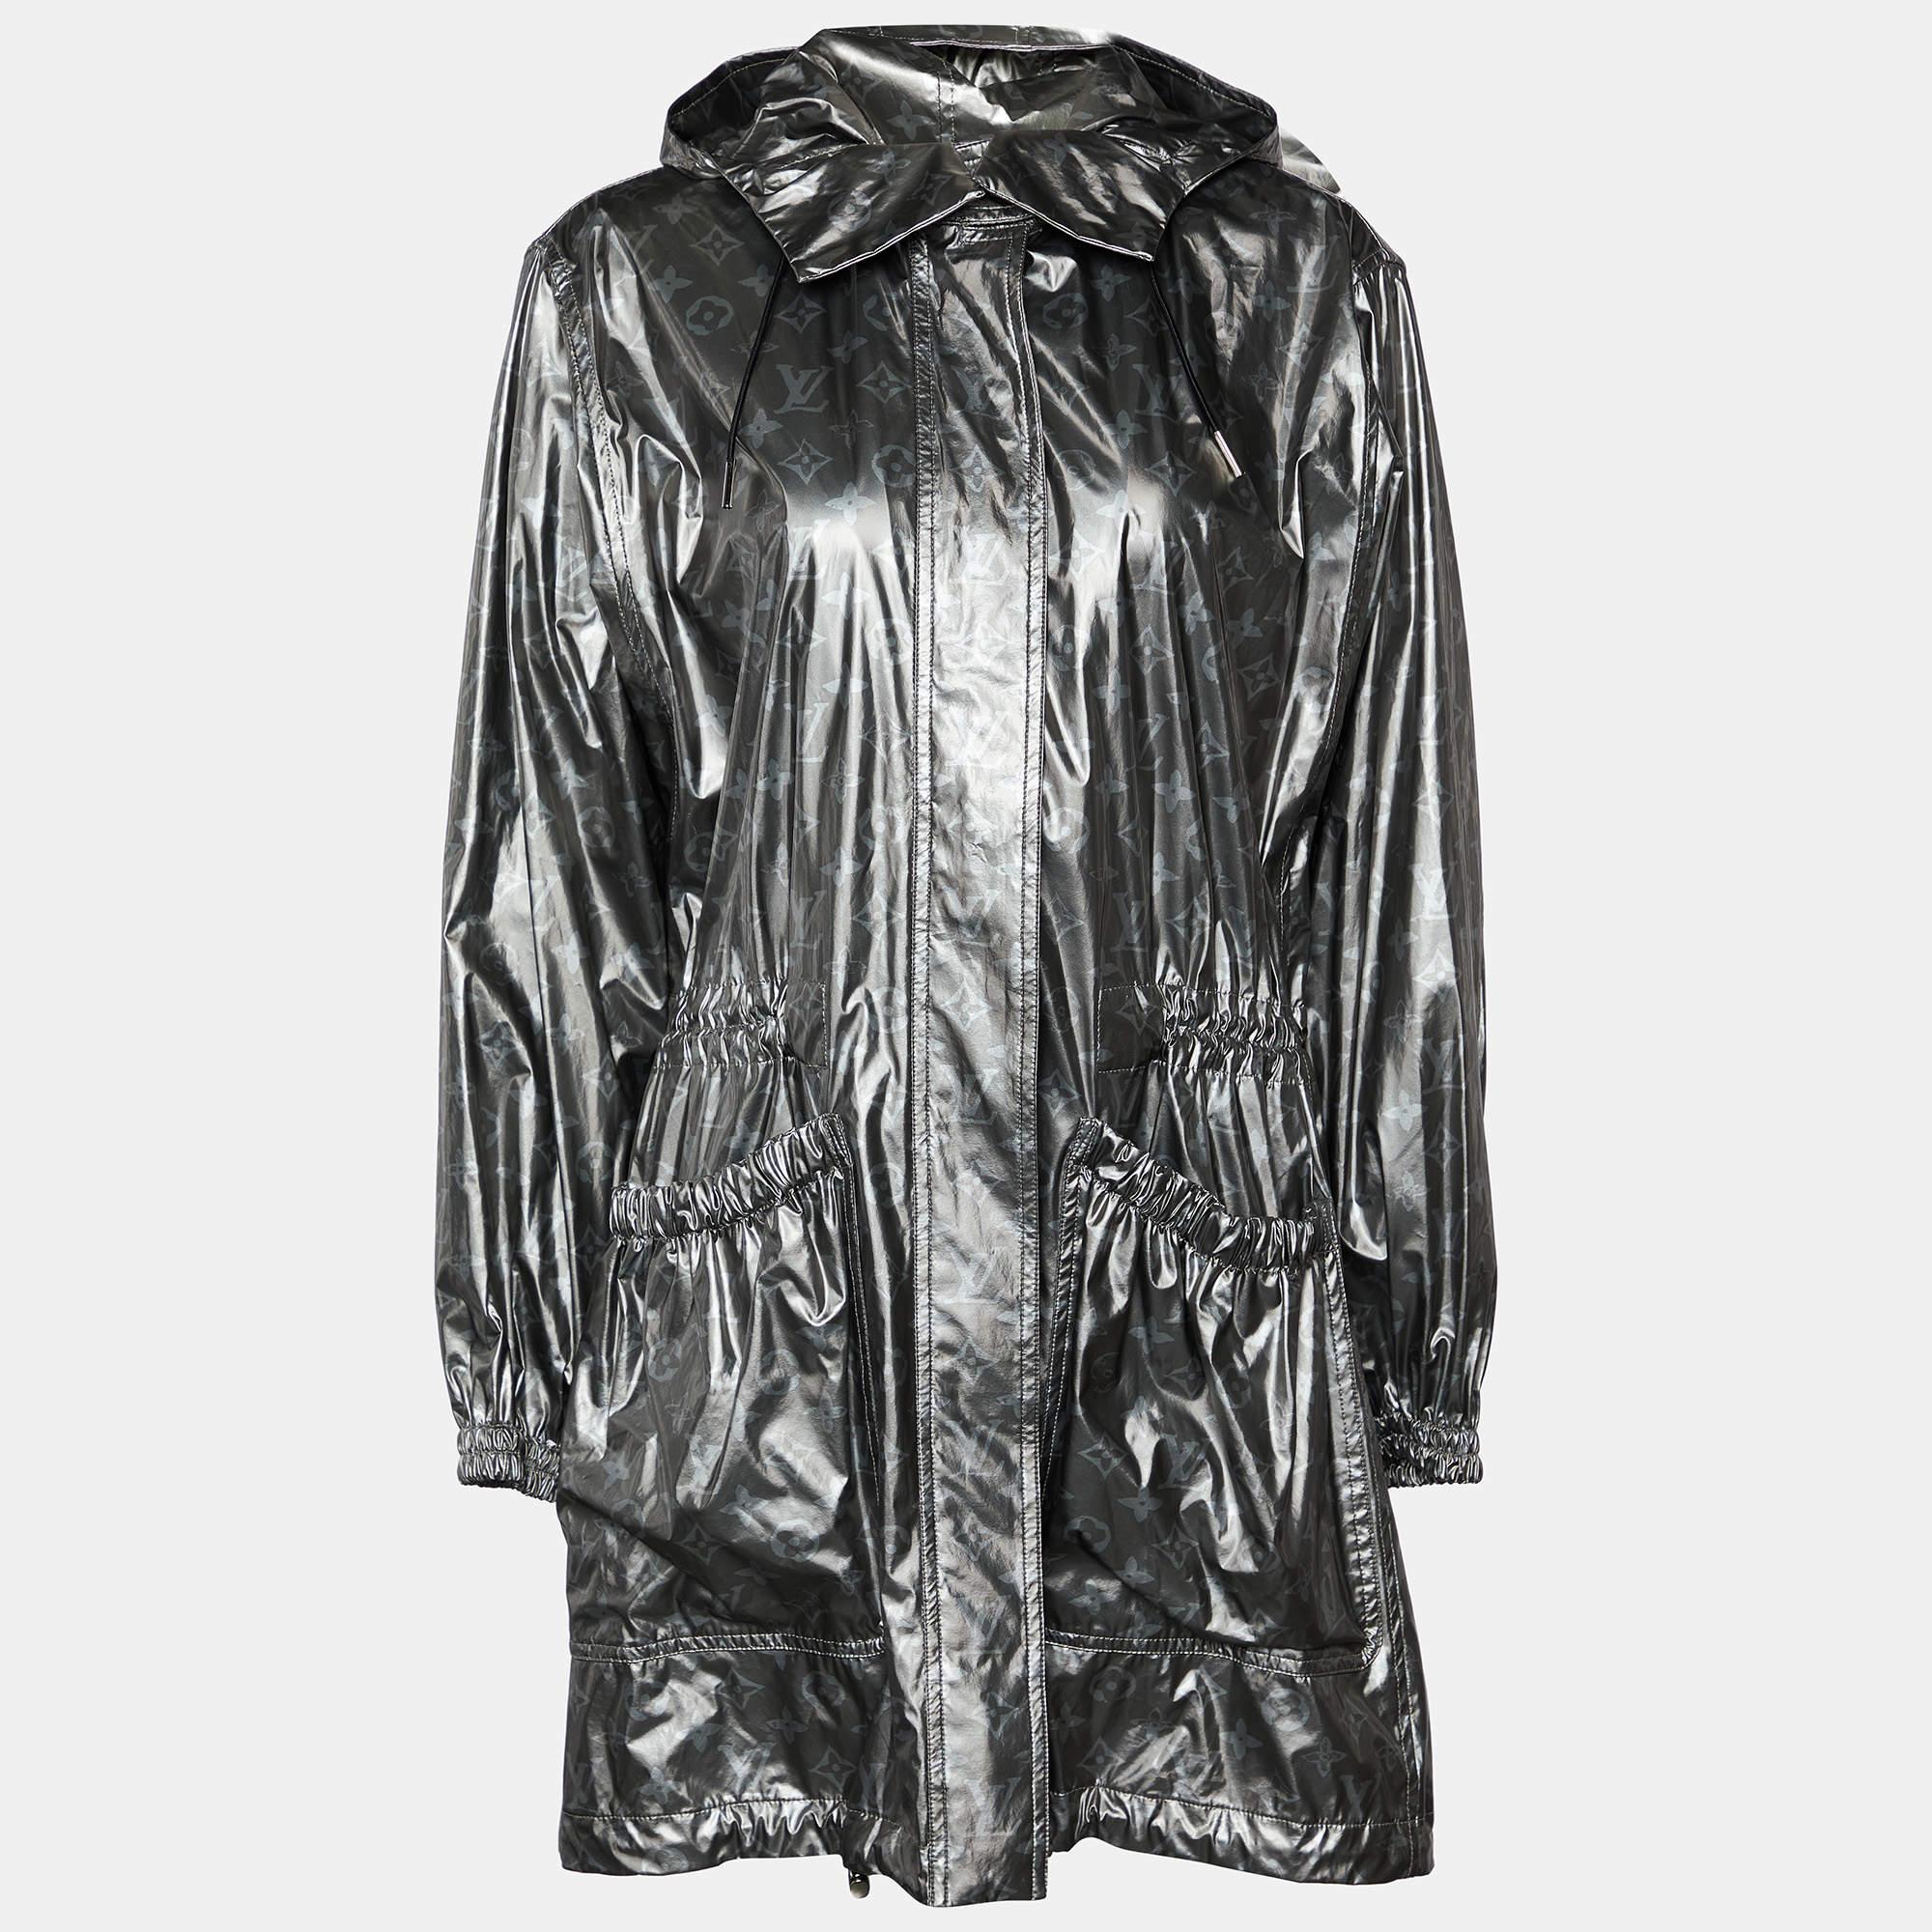 Made from coated modal fabric in a metallic grey shade, it features a zip front closure, a hood for added protection, and embodies a sleek and contemporary aesthetic with a touch of luxury.

